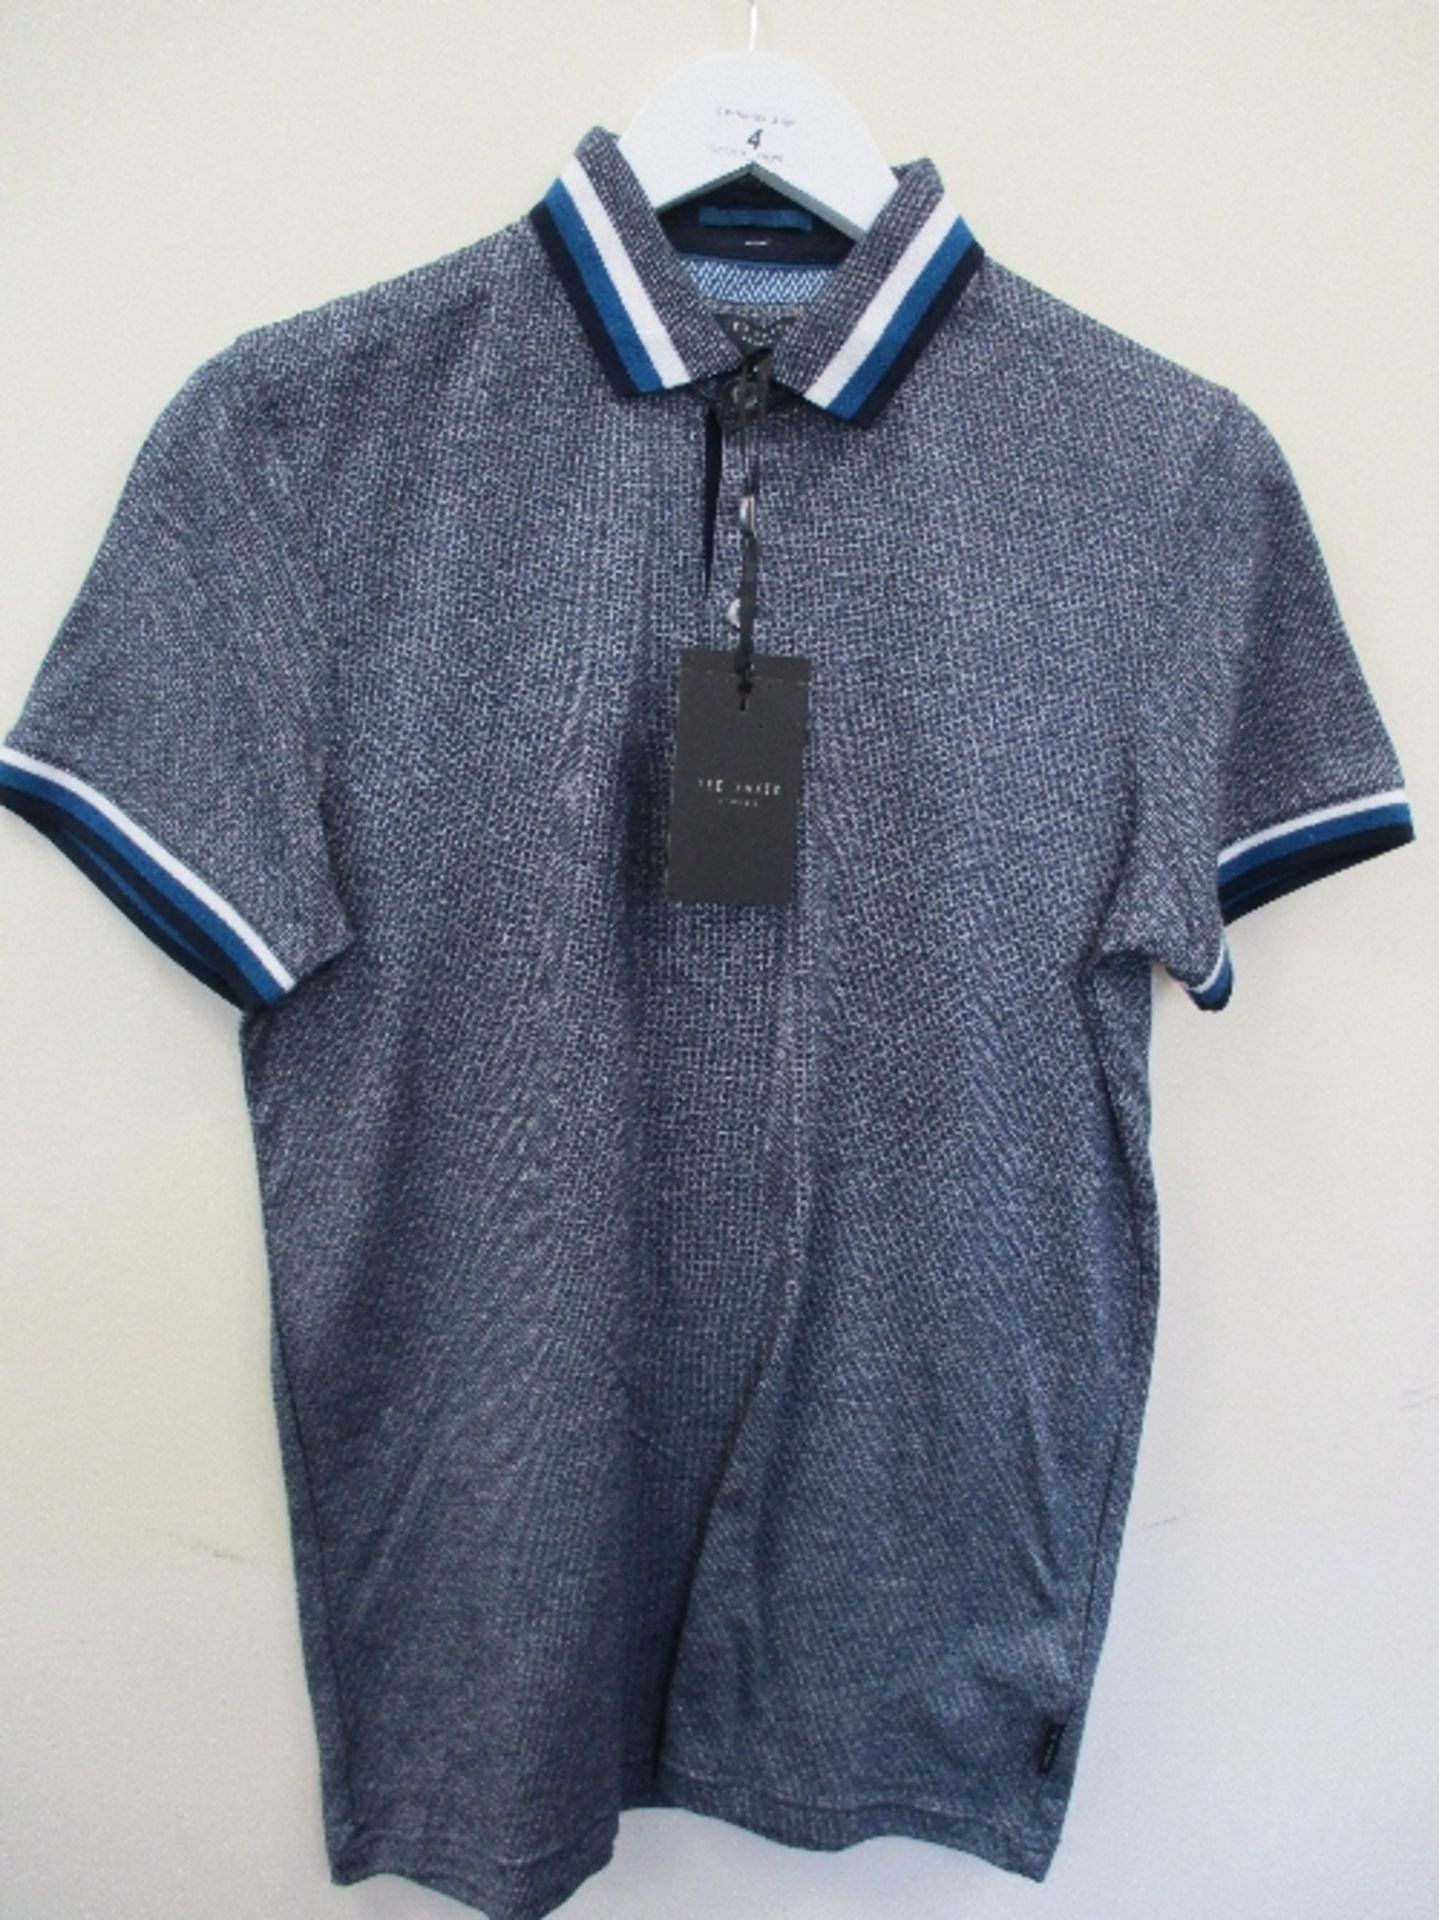 Ted Baker polo shirt - navy - small RRP £69